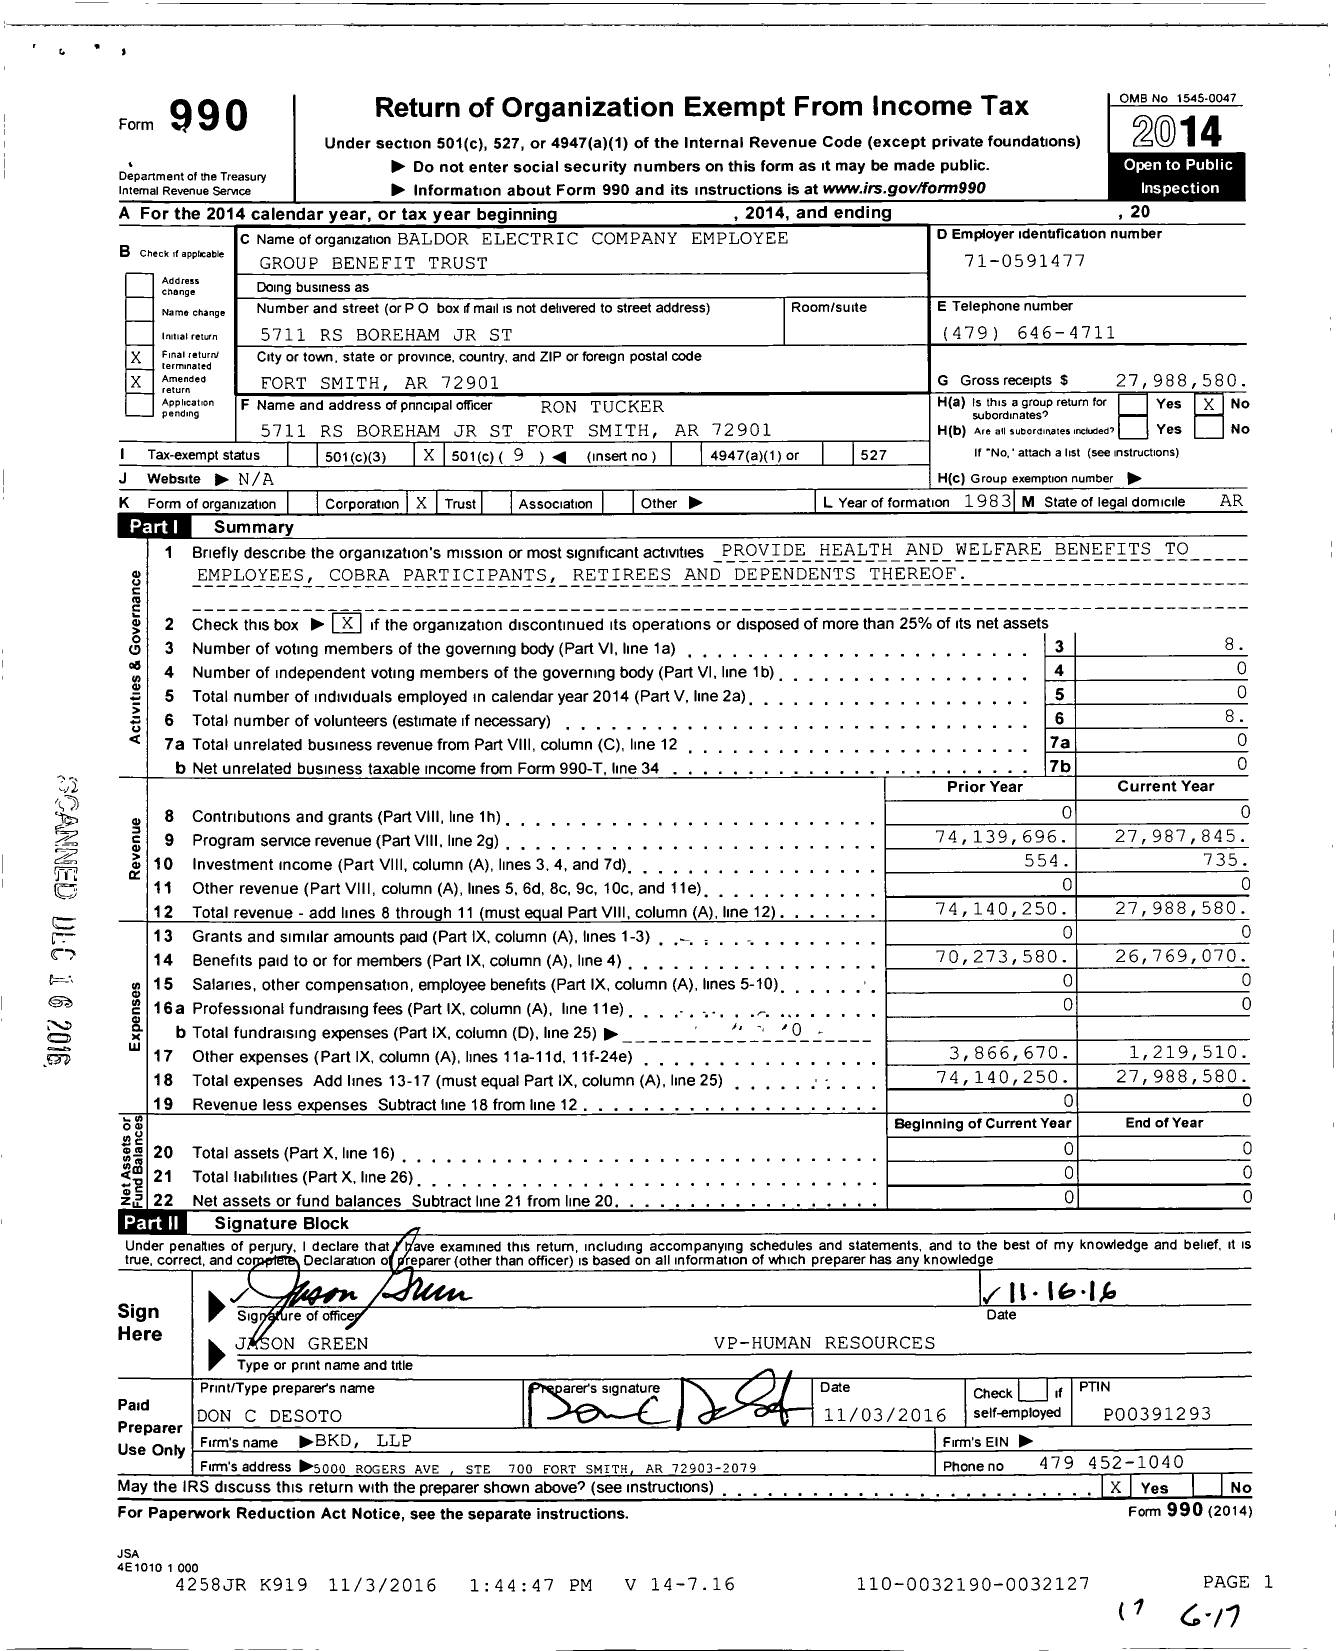 Image of first page of 2014 Form 990O for Baldor Electric Company Employee Group Benefit Trust